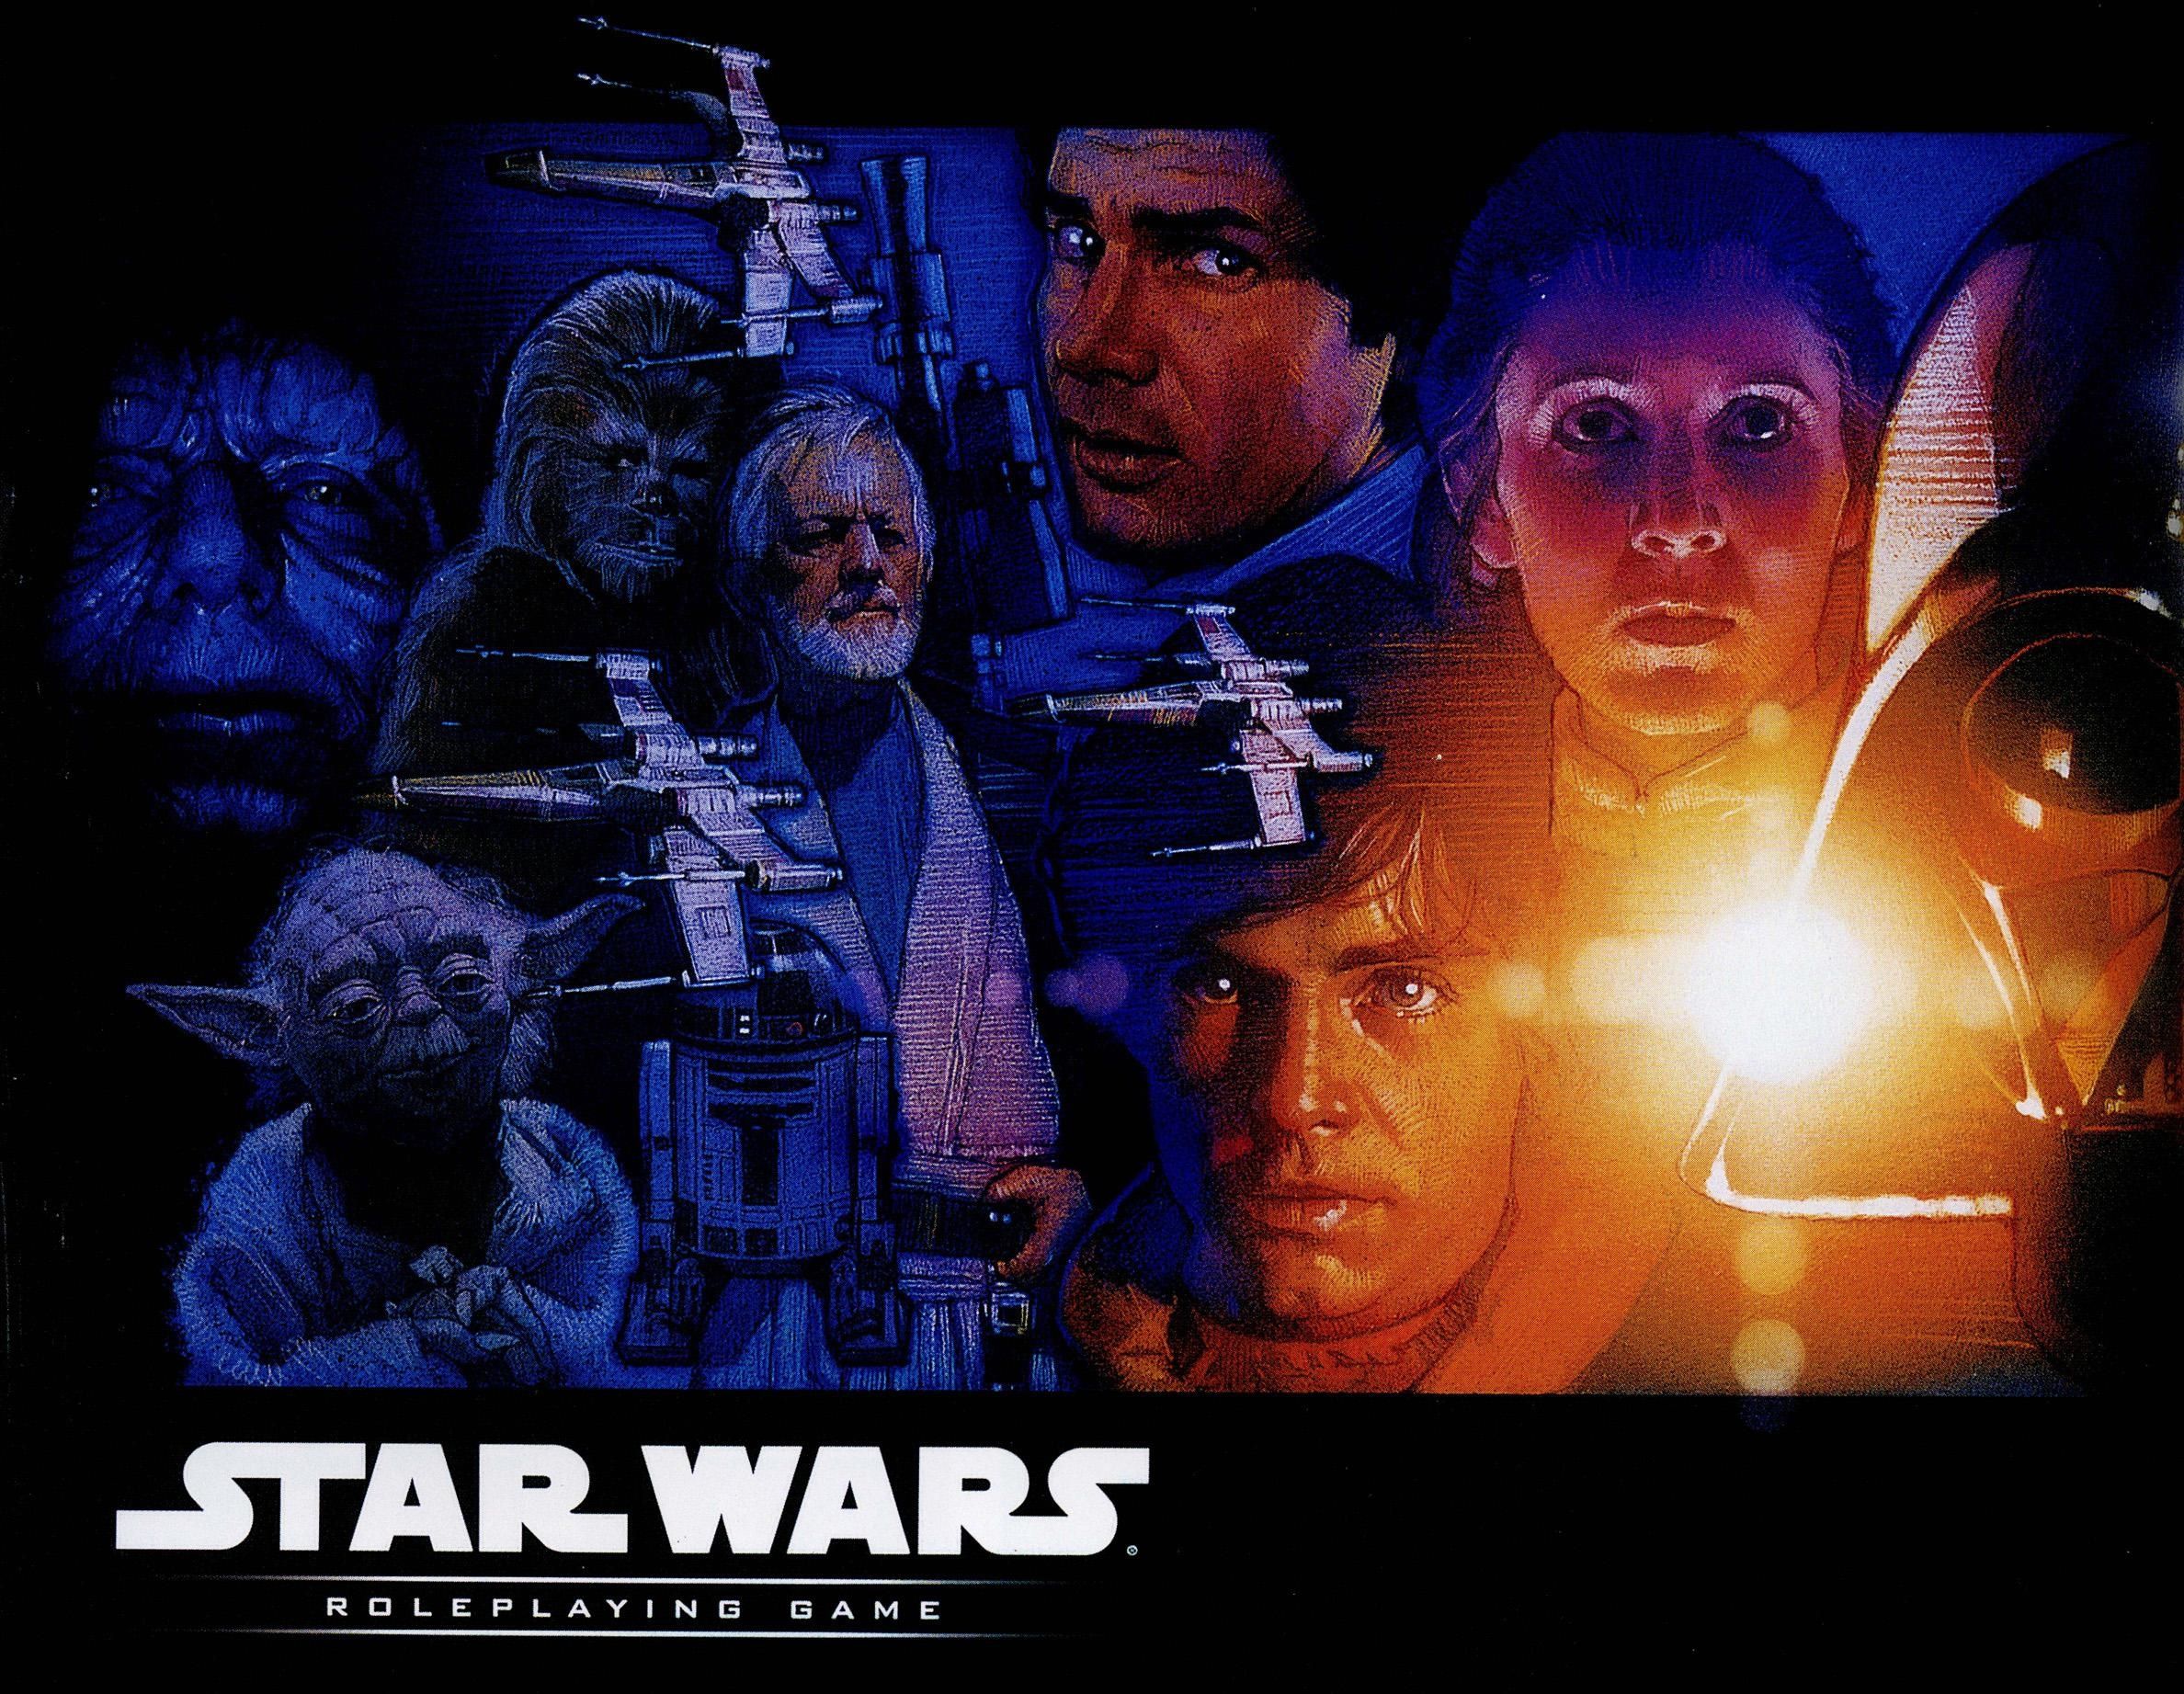 Free download Star Wars Episode IV new Hope wallpaper and image